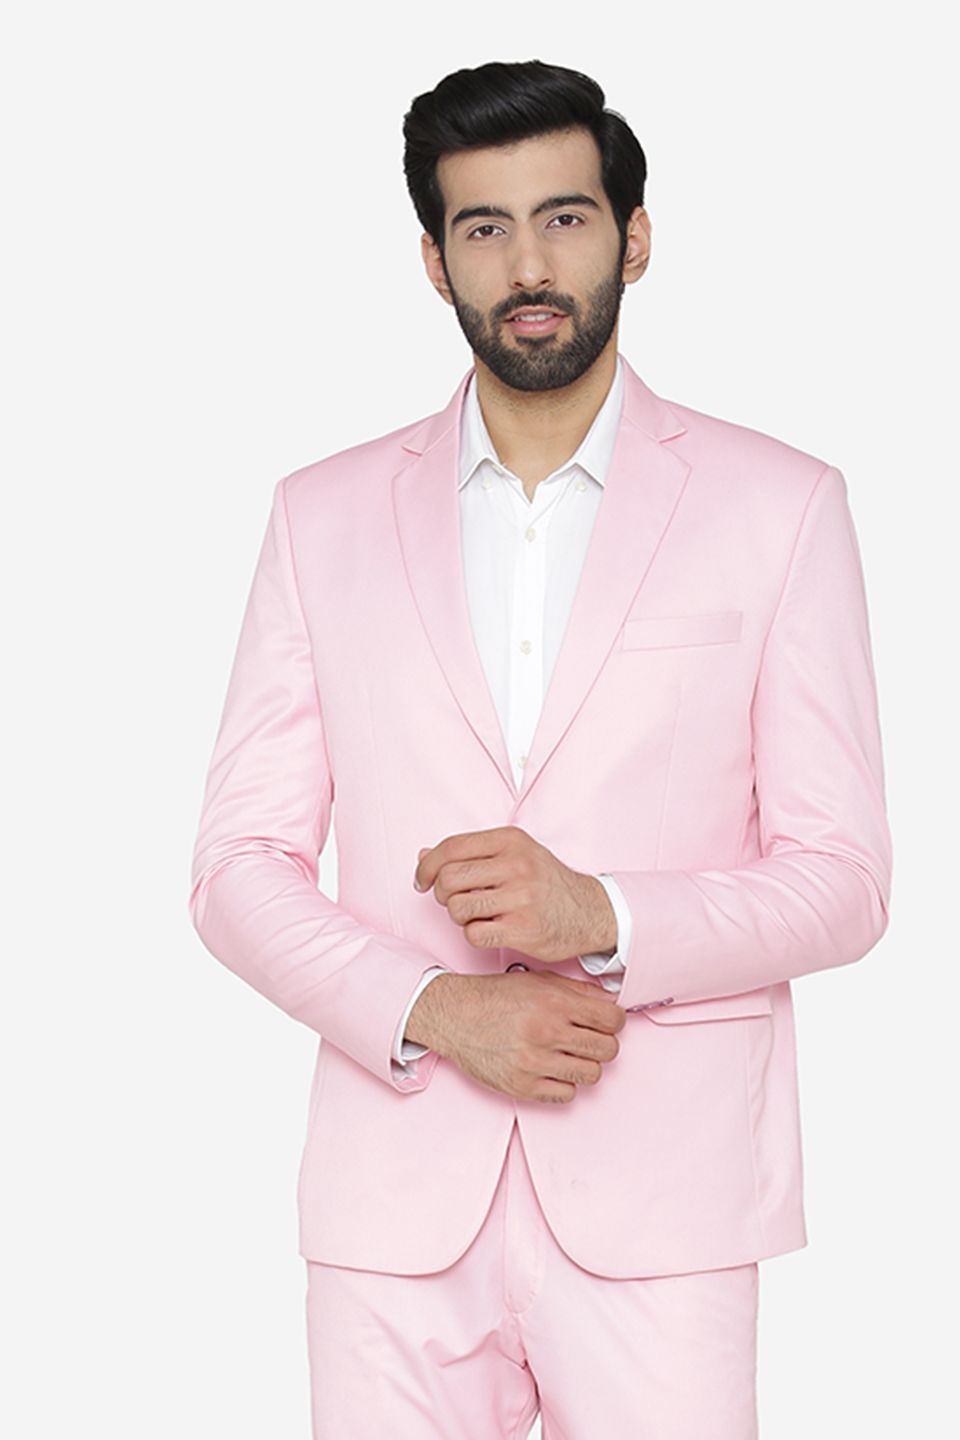 Wintage Men's Polyester Cotton Festive and Casual Blazer Coat Jacket : Pink